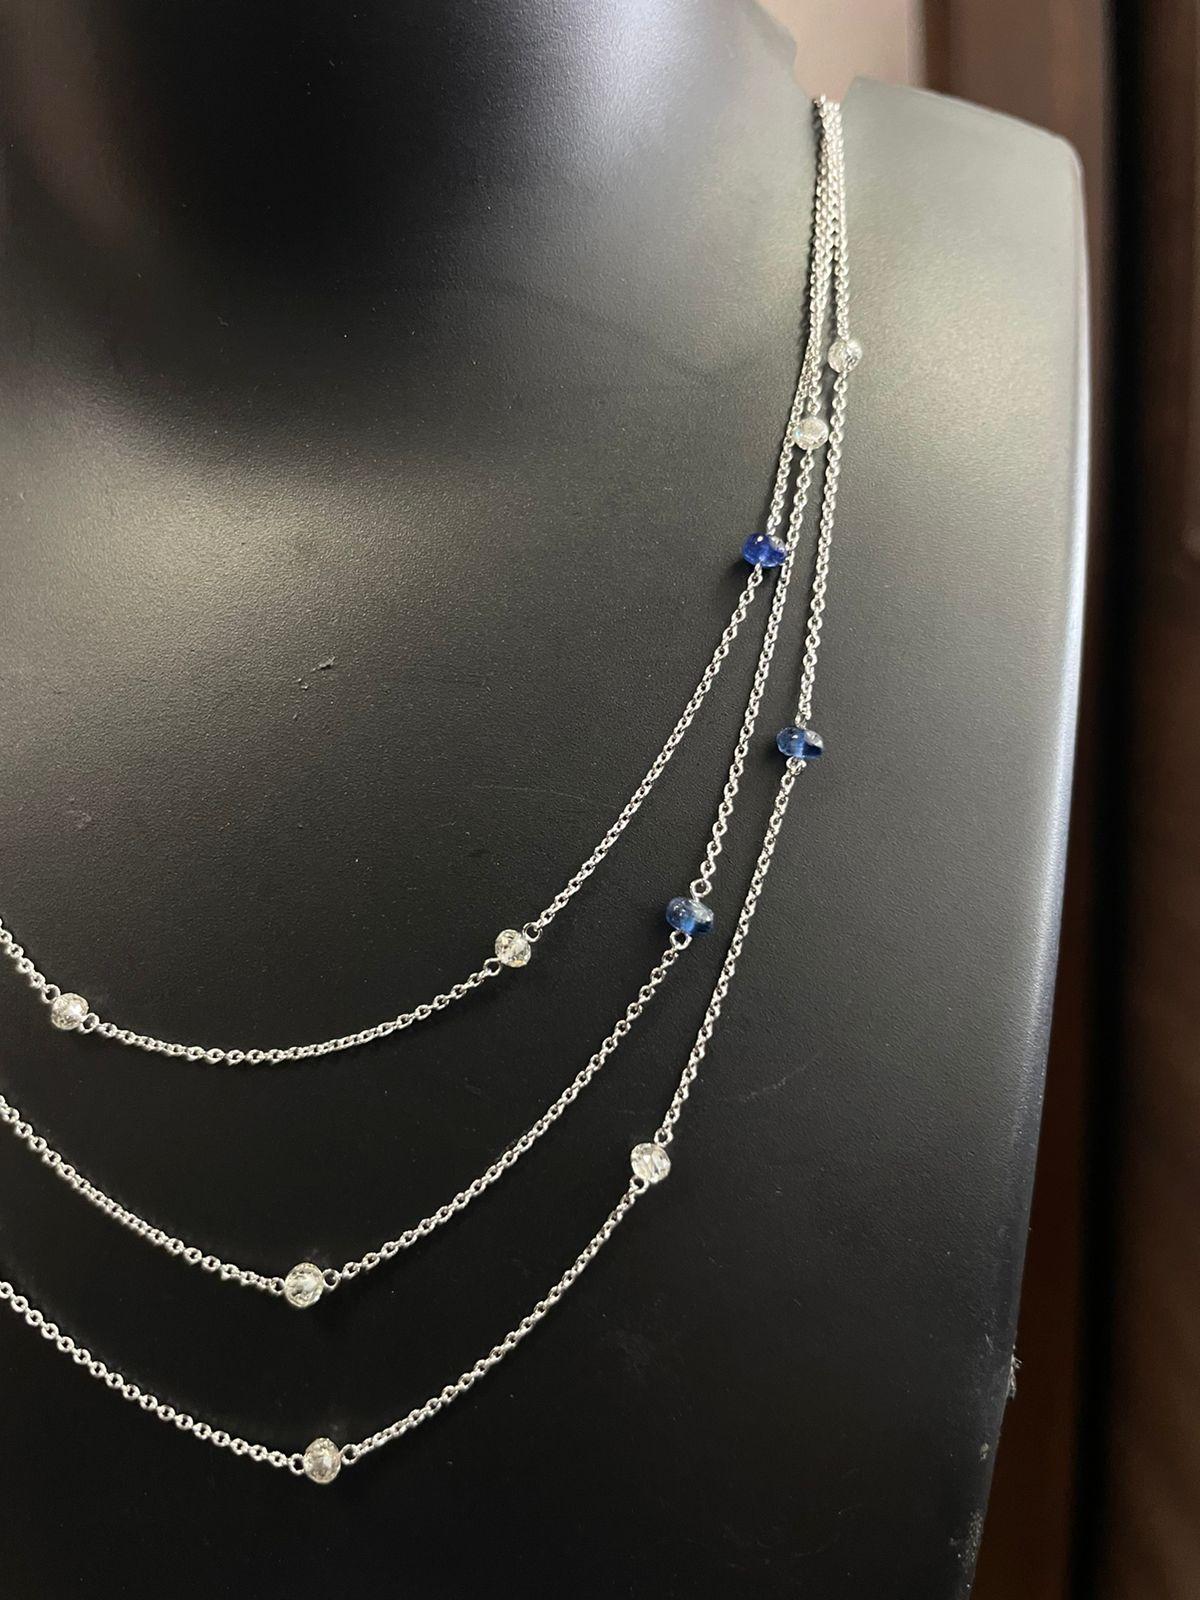 PANIM White Diamond Beads & Sapphire Tri Layer Necklace in 18 Karat White Gold In New Condition For Sale In Tsim Sha Tsui, Hong Kong